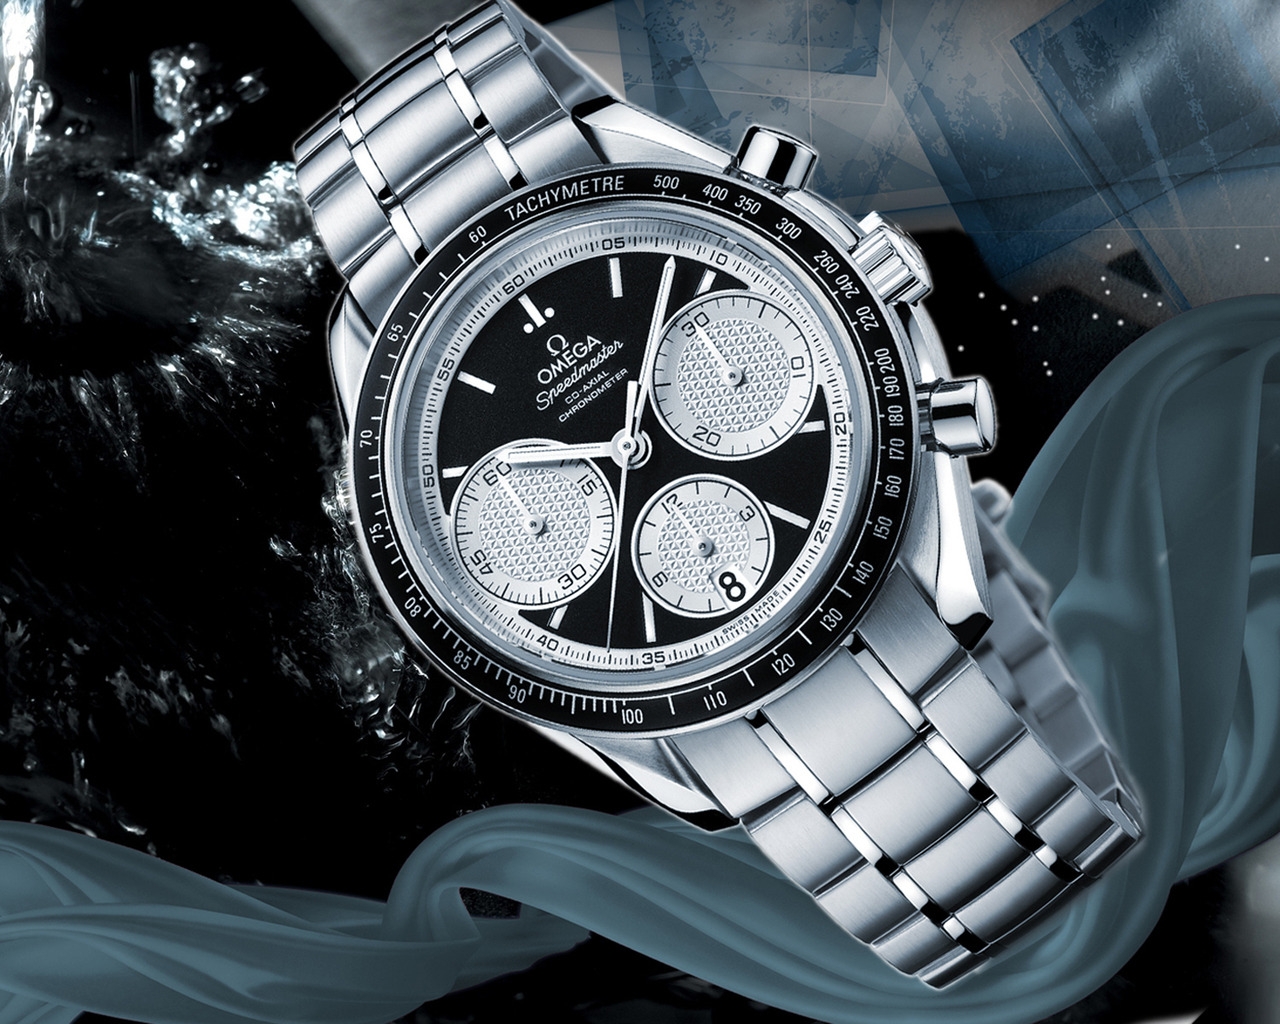 Omega Speedmaster CoAxial Chronometer for 1280 x 1024 resolution